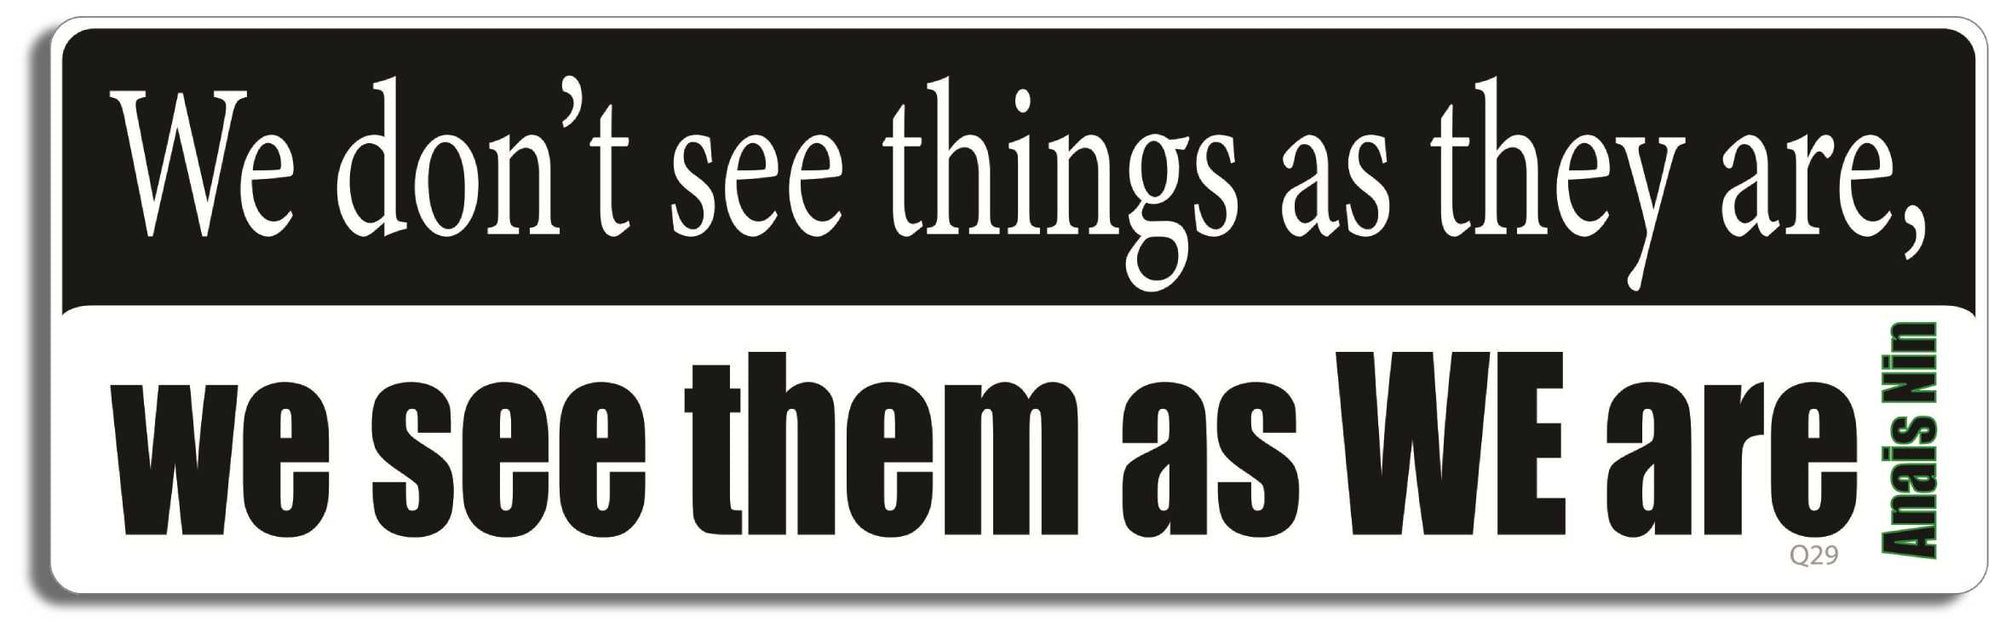 We don't see things as they are,  we see them as we are - Anais Nin -  3" x 10" Bumper Sticker--Car Magnet- -  Decal Bumper Sticker-quotation Bumper Sticker Car Magnet We don't see things as they are,-  Decal for carsquotation, quote